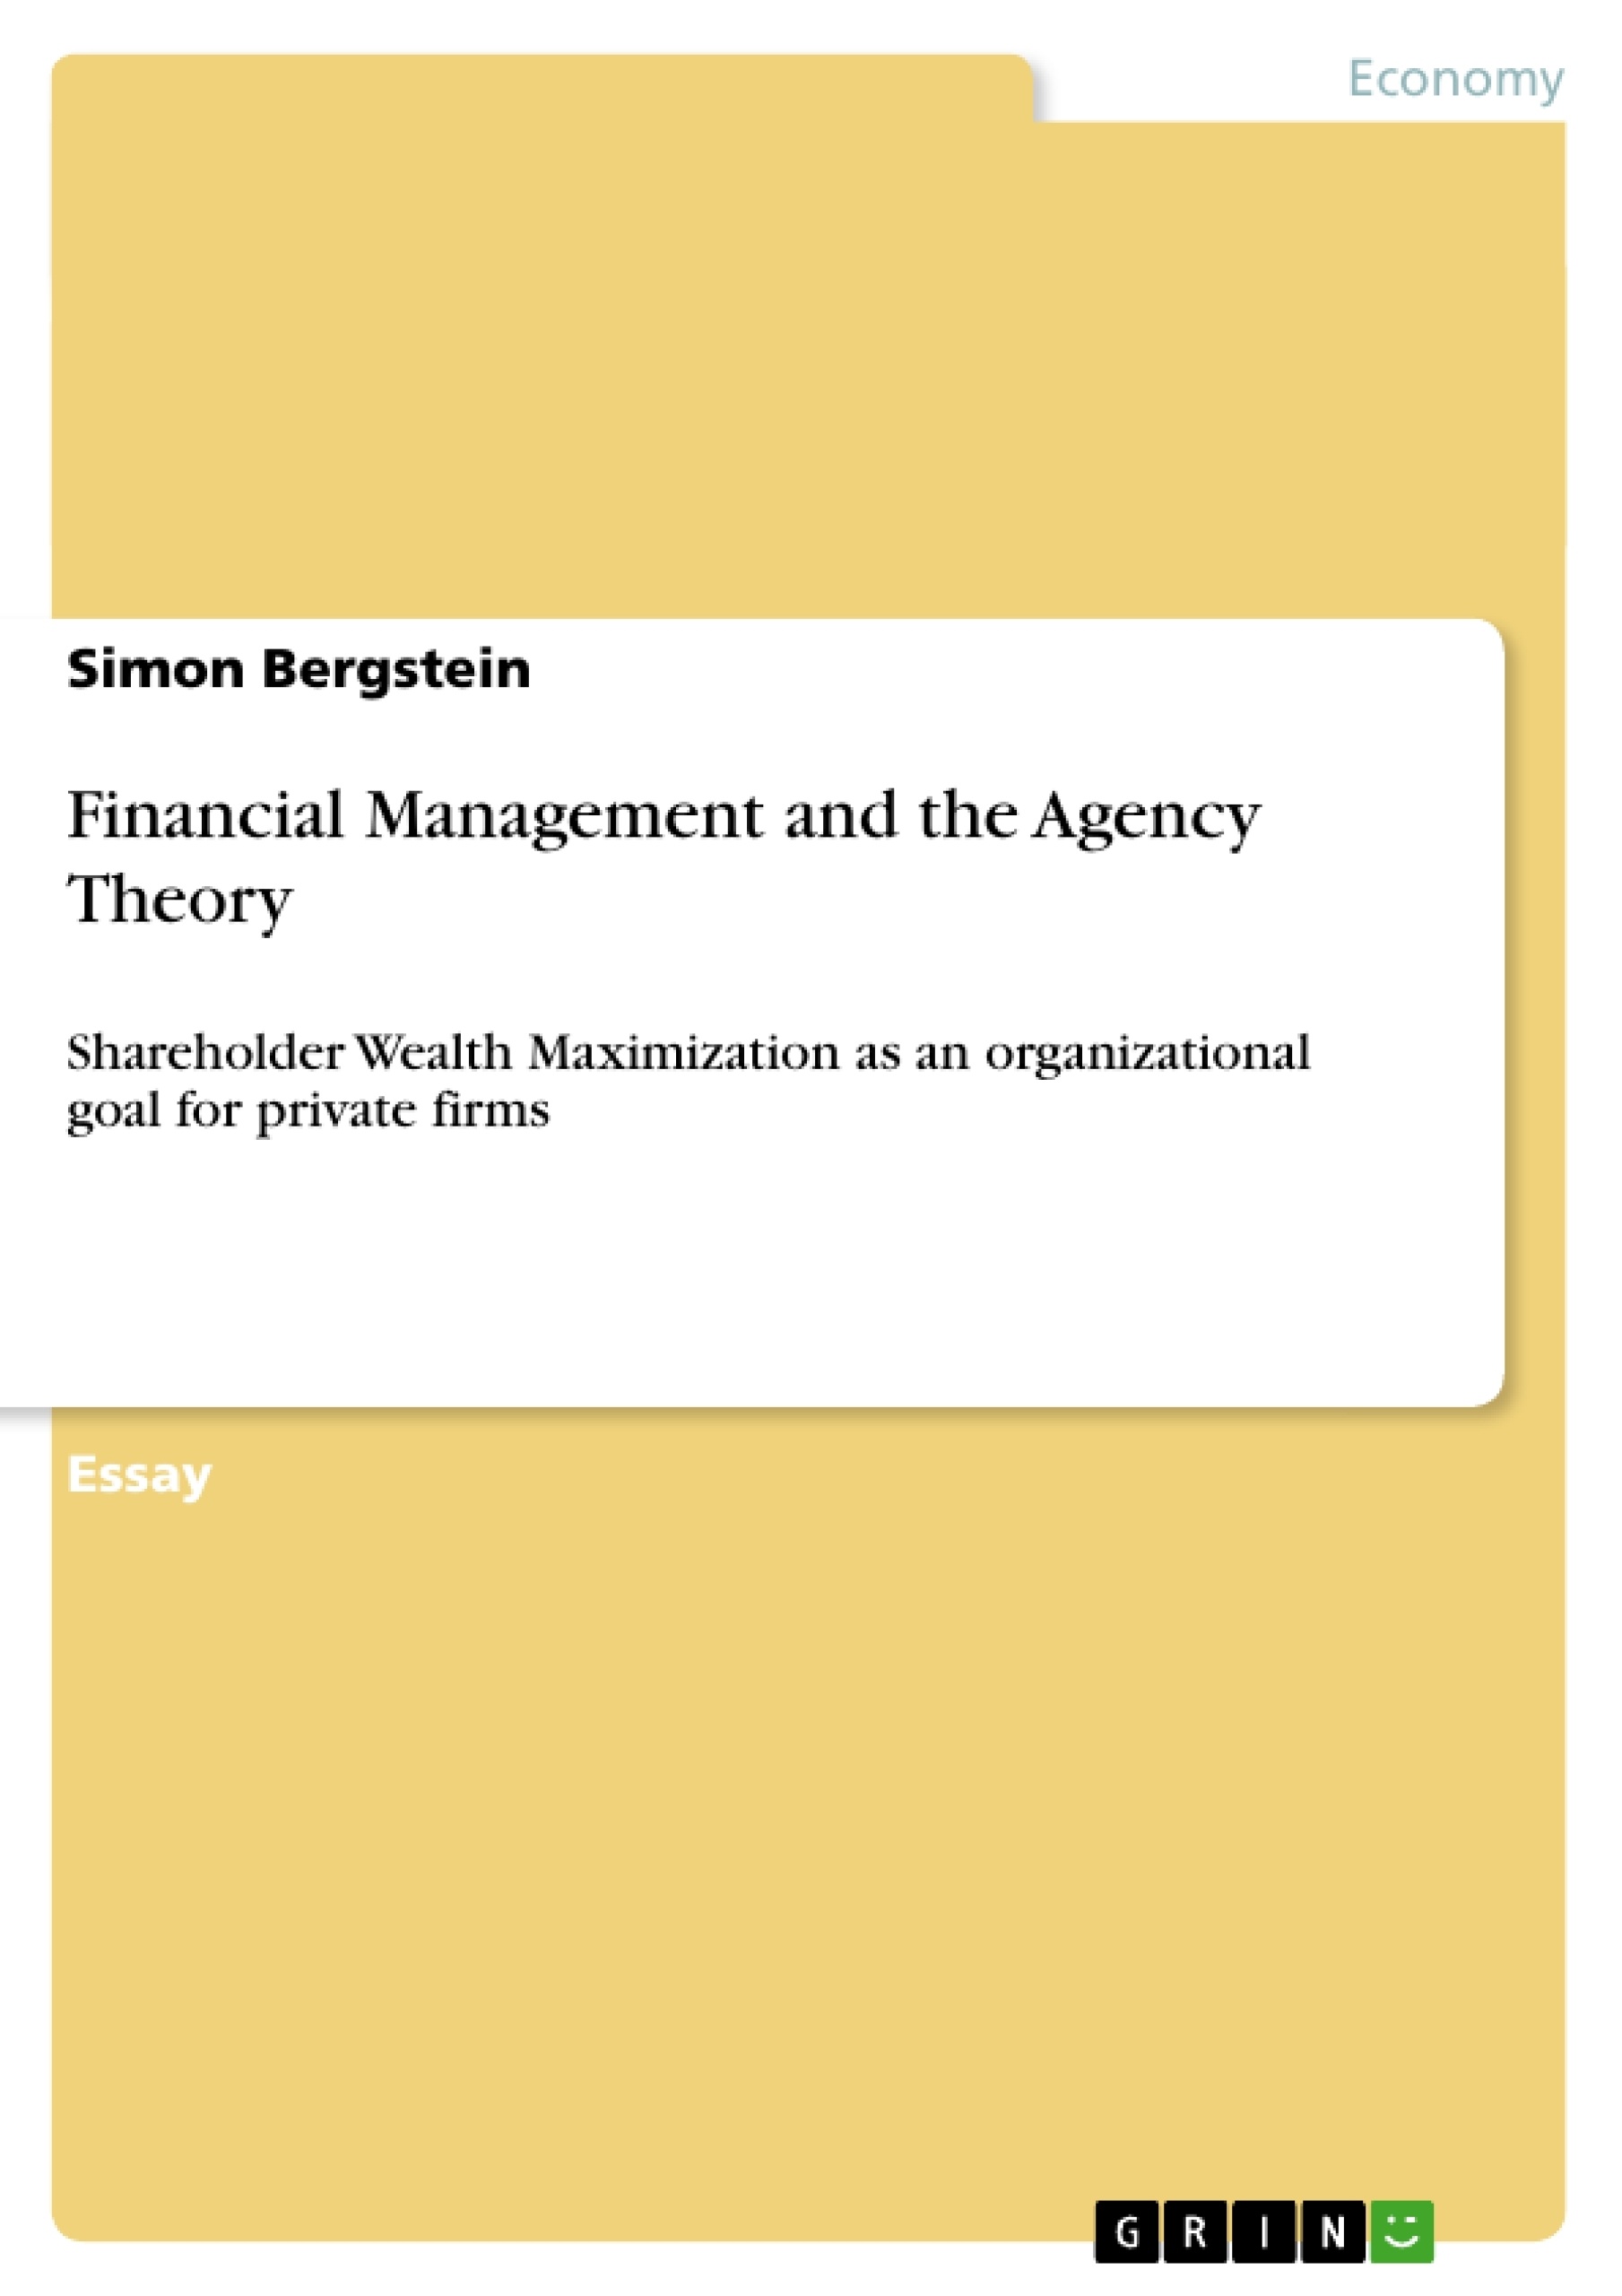 Title: Financial Management and the Agency Theory